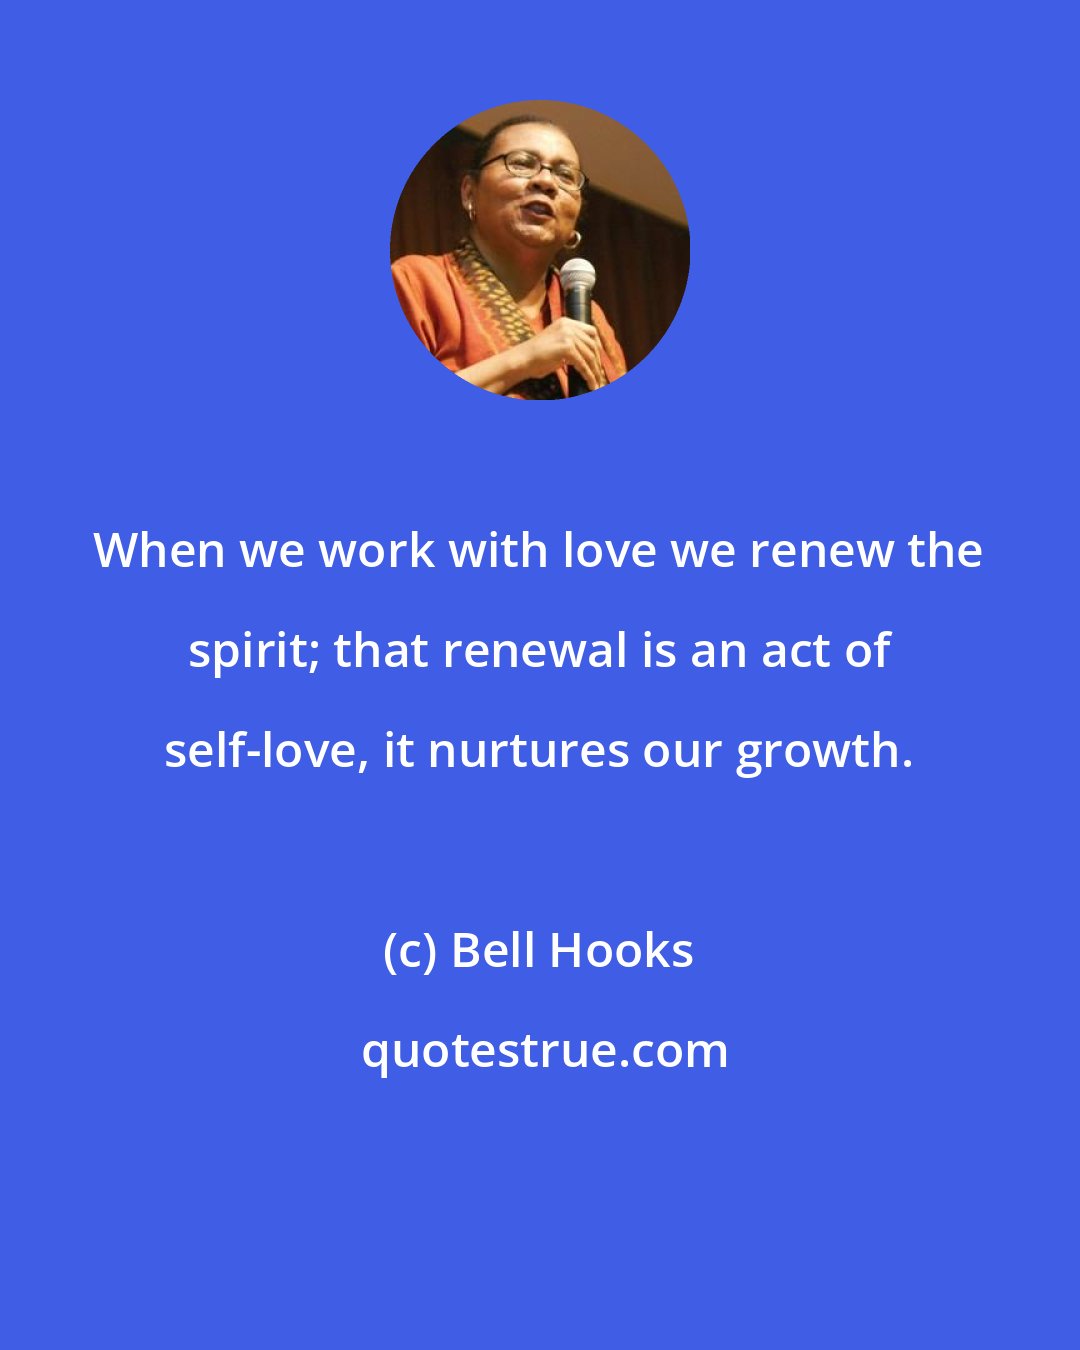 Bell Hooks: When we work with love we renew the spirit; that renewal is an act of self-love, it nurtures our growth.